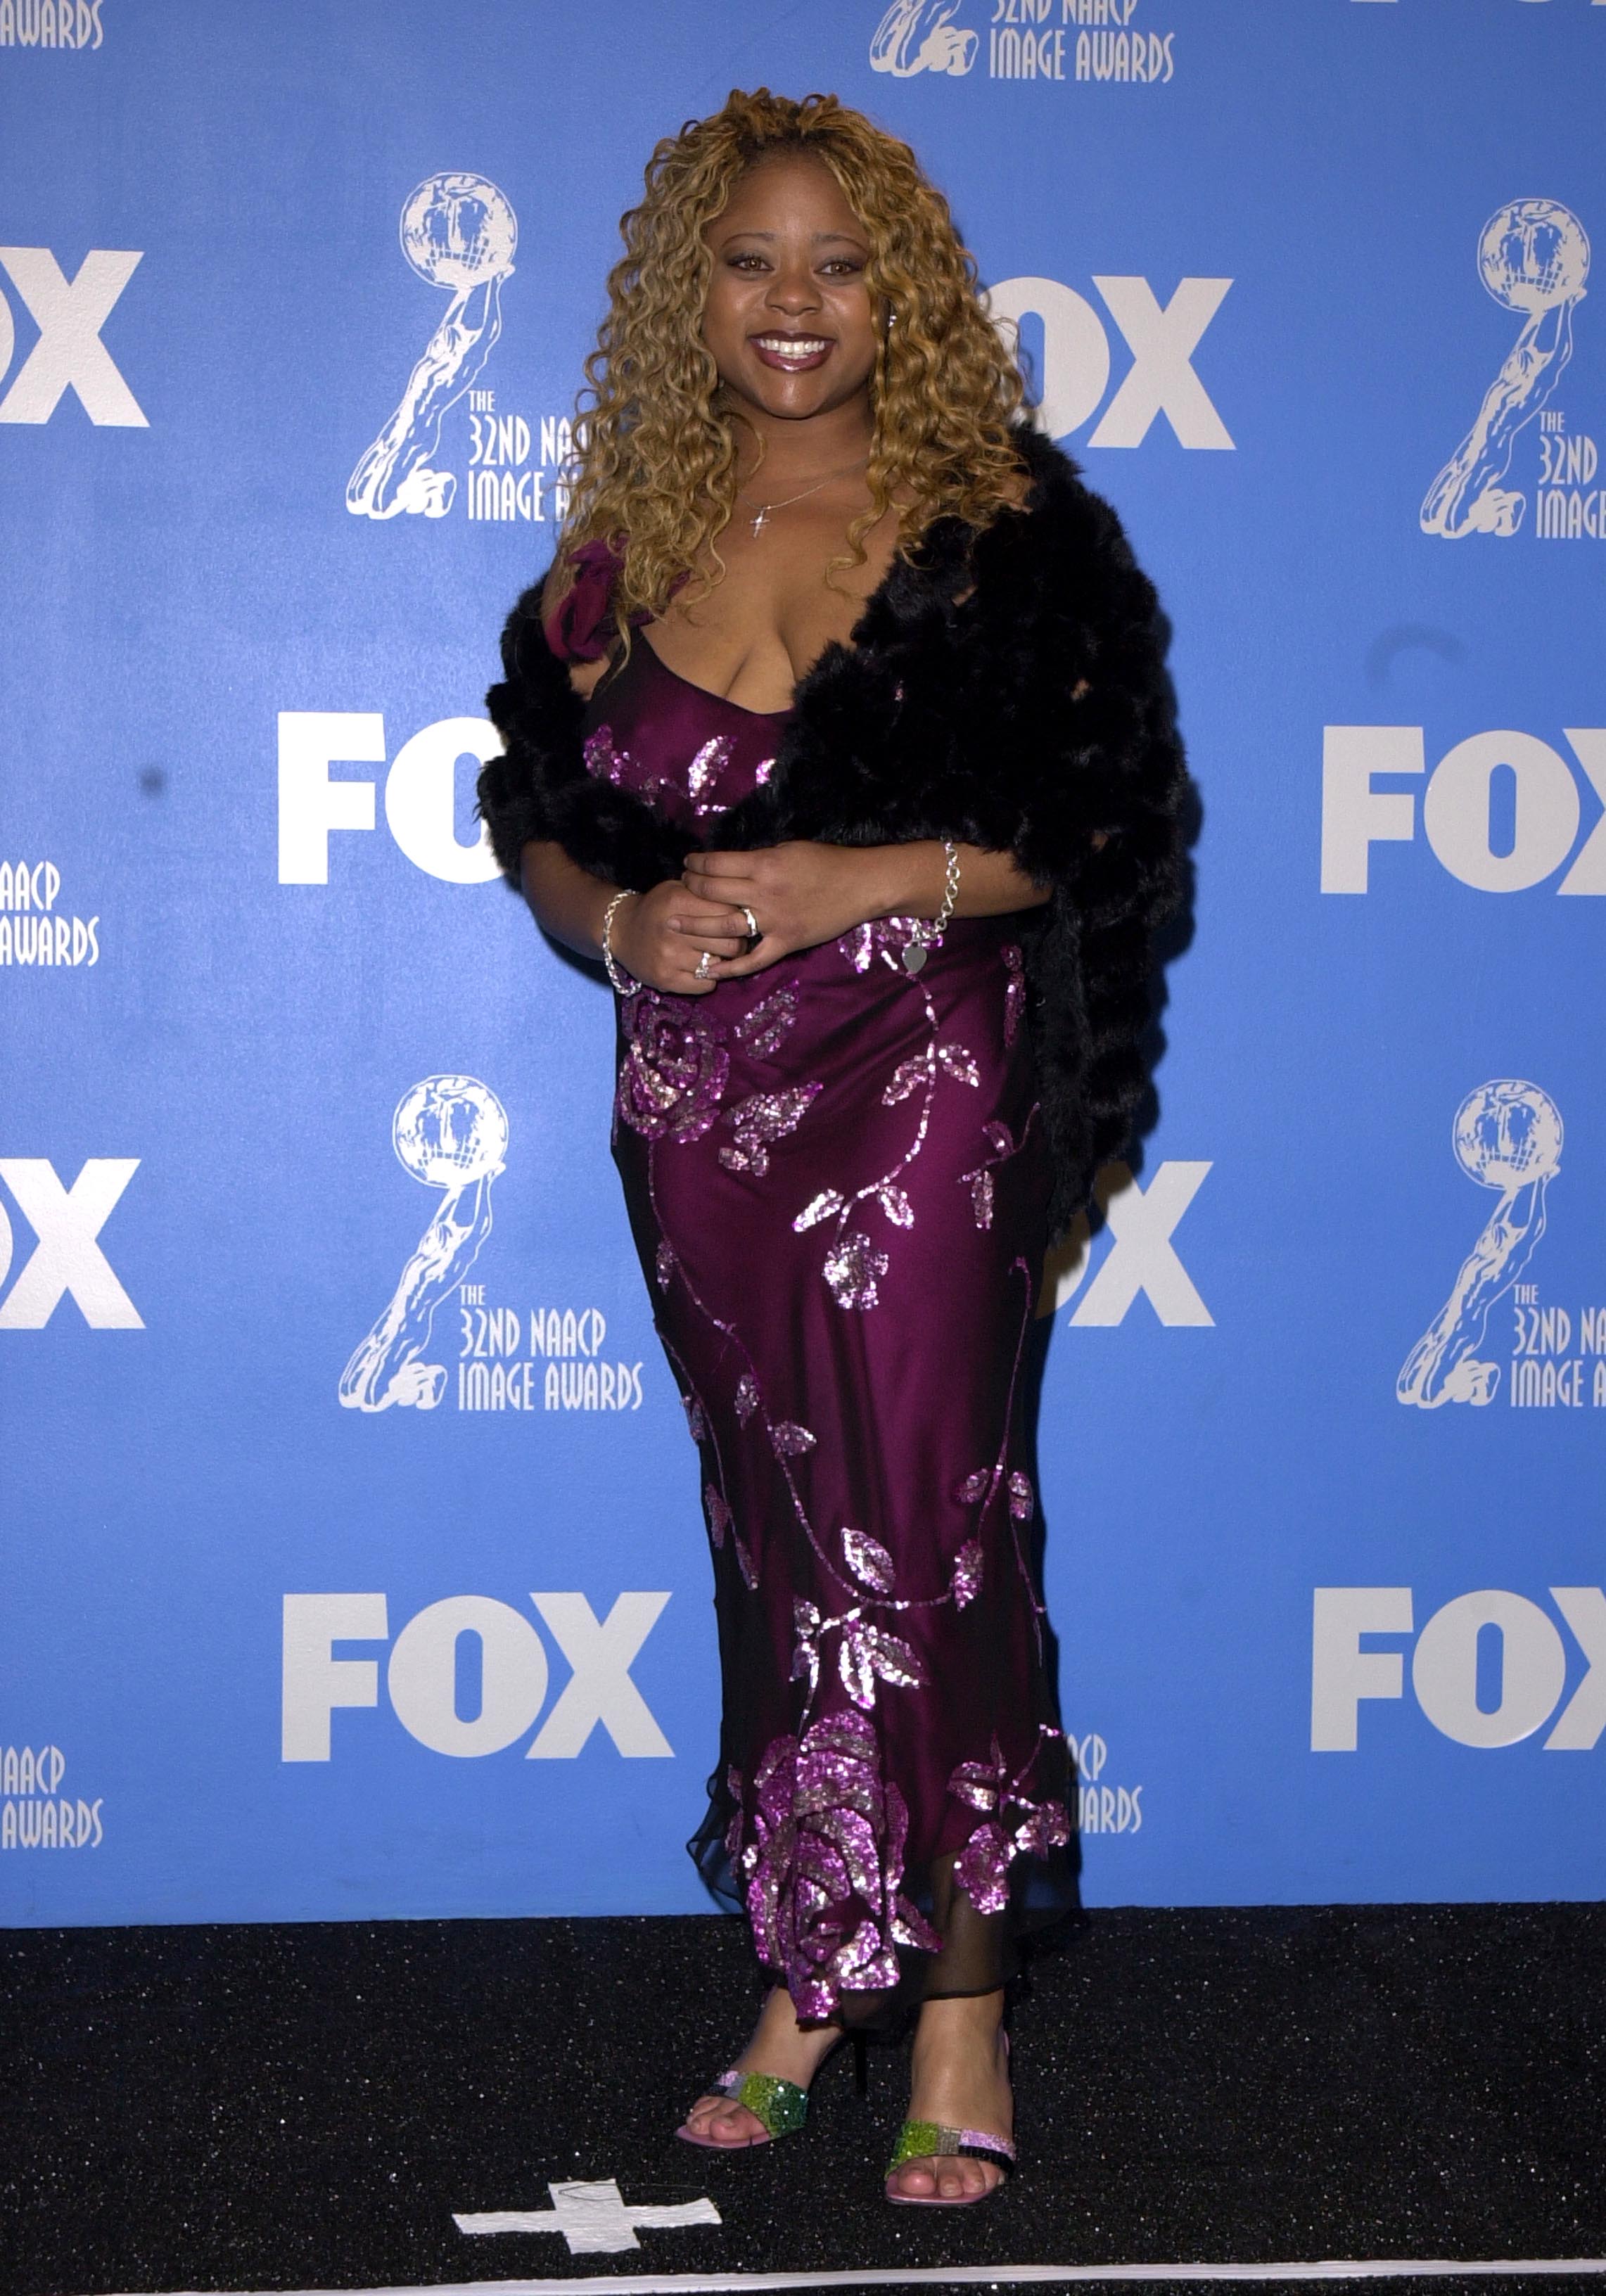 Countess Vaughn at the 32nd Annual NAACP Image Awards -Music, 2001  | Photo: GettyImages